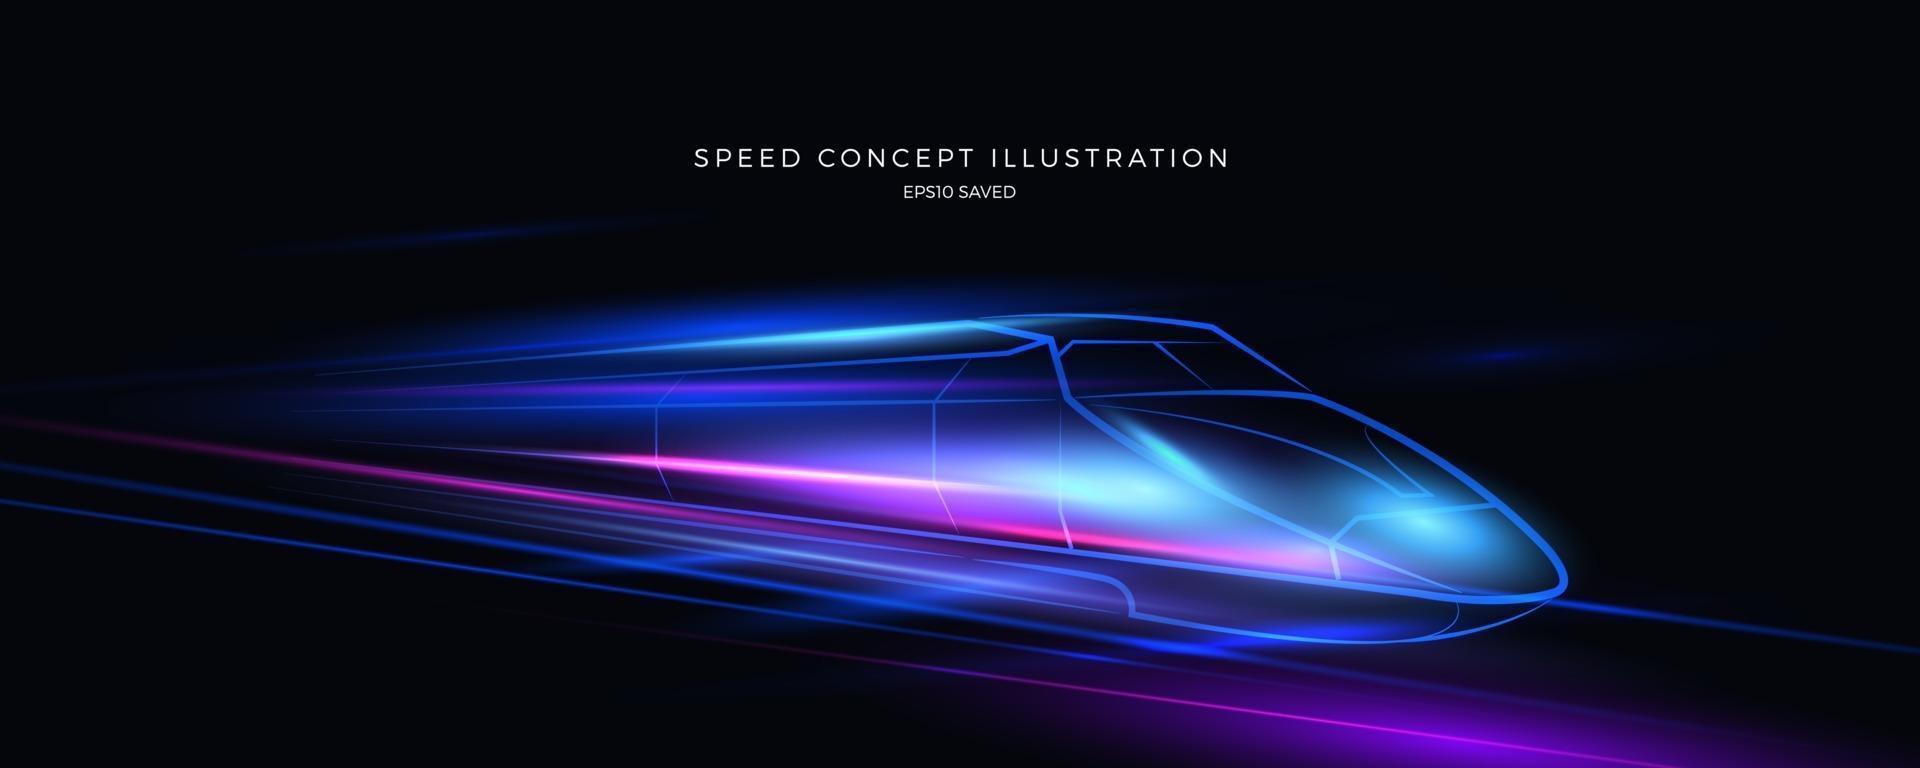 speed concept illustration, fast background vector